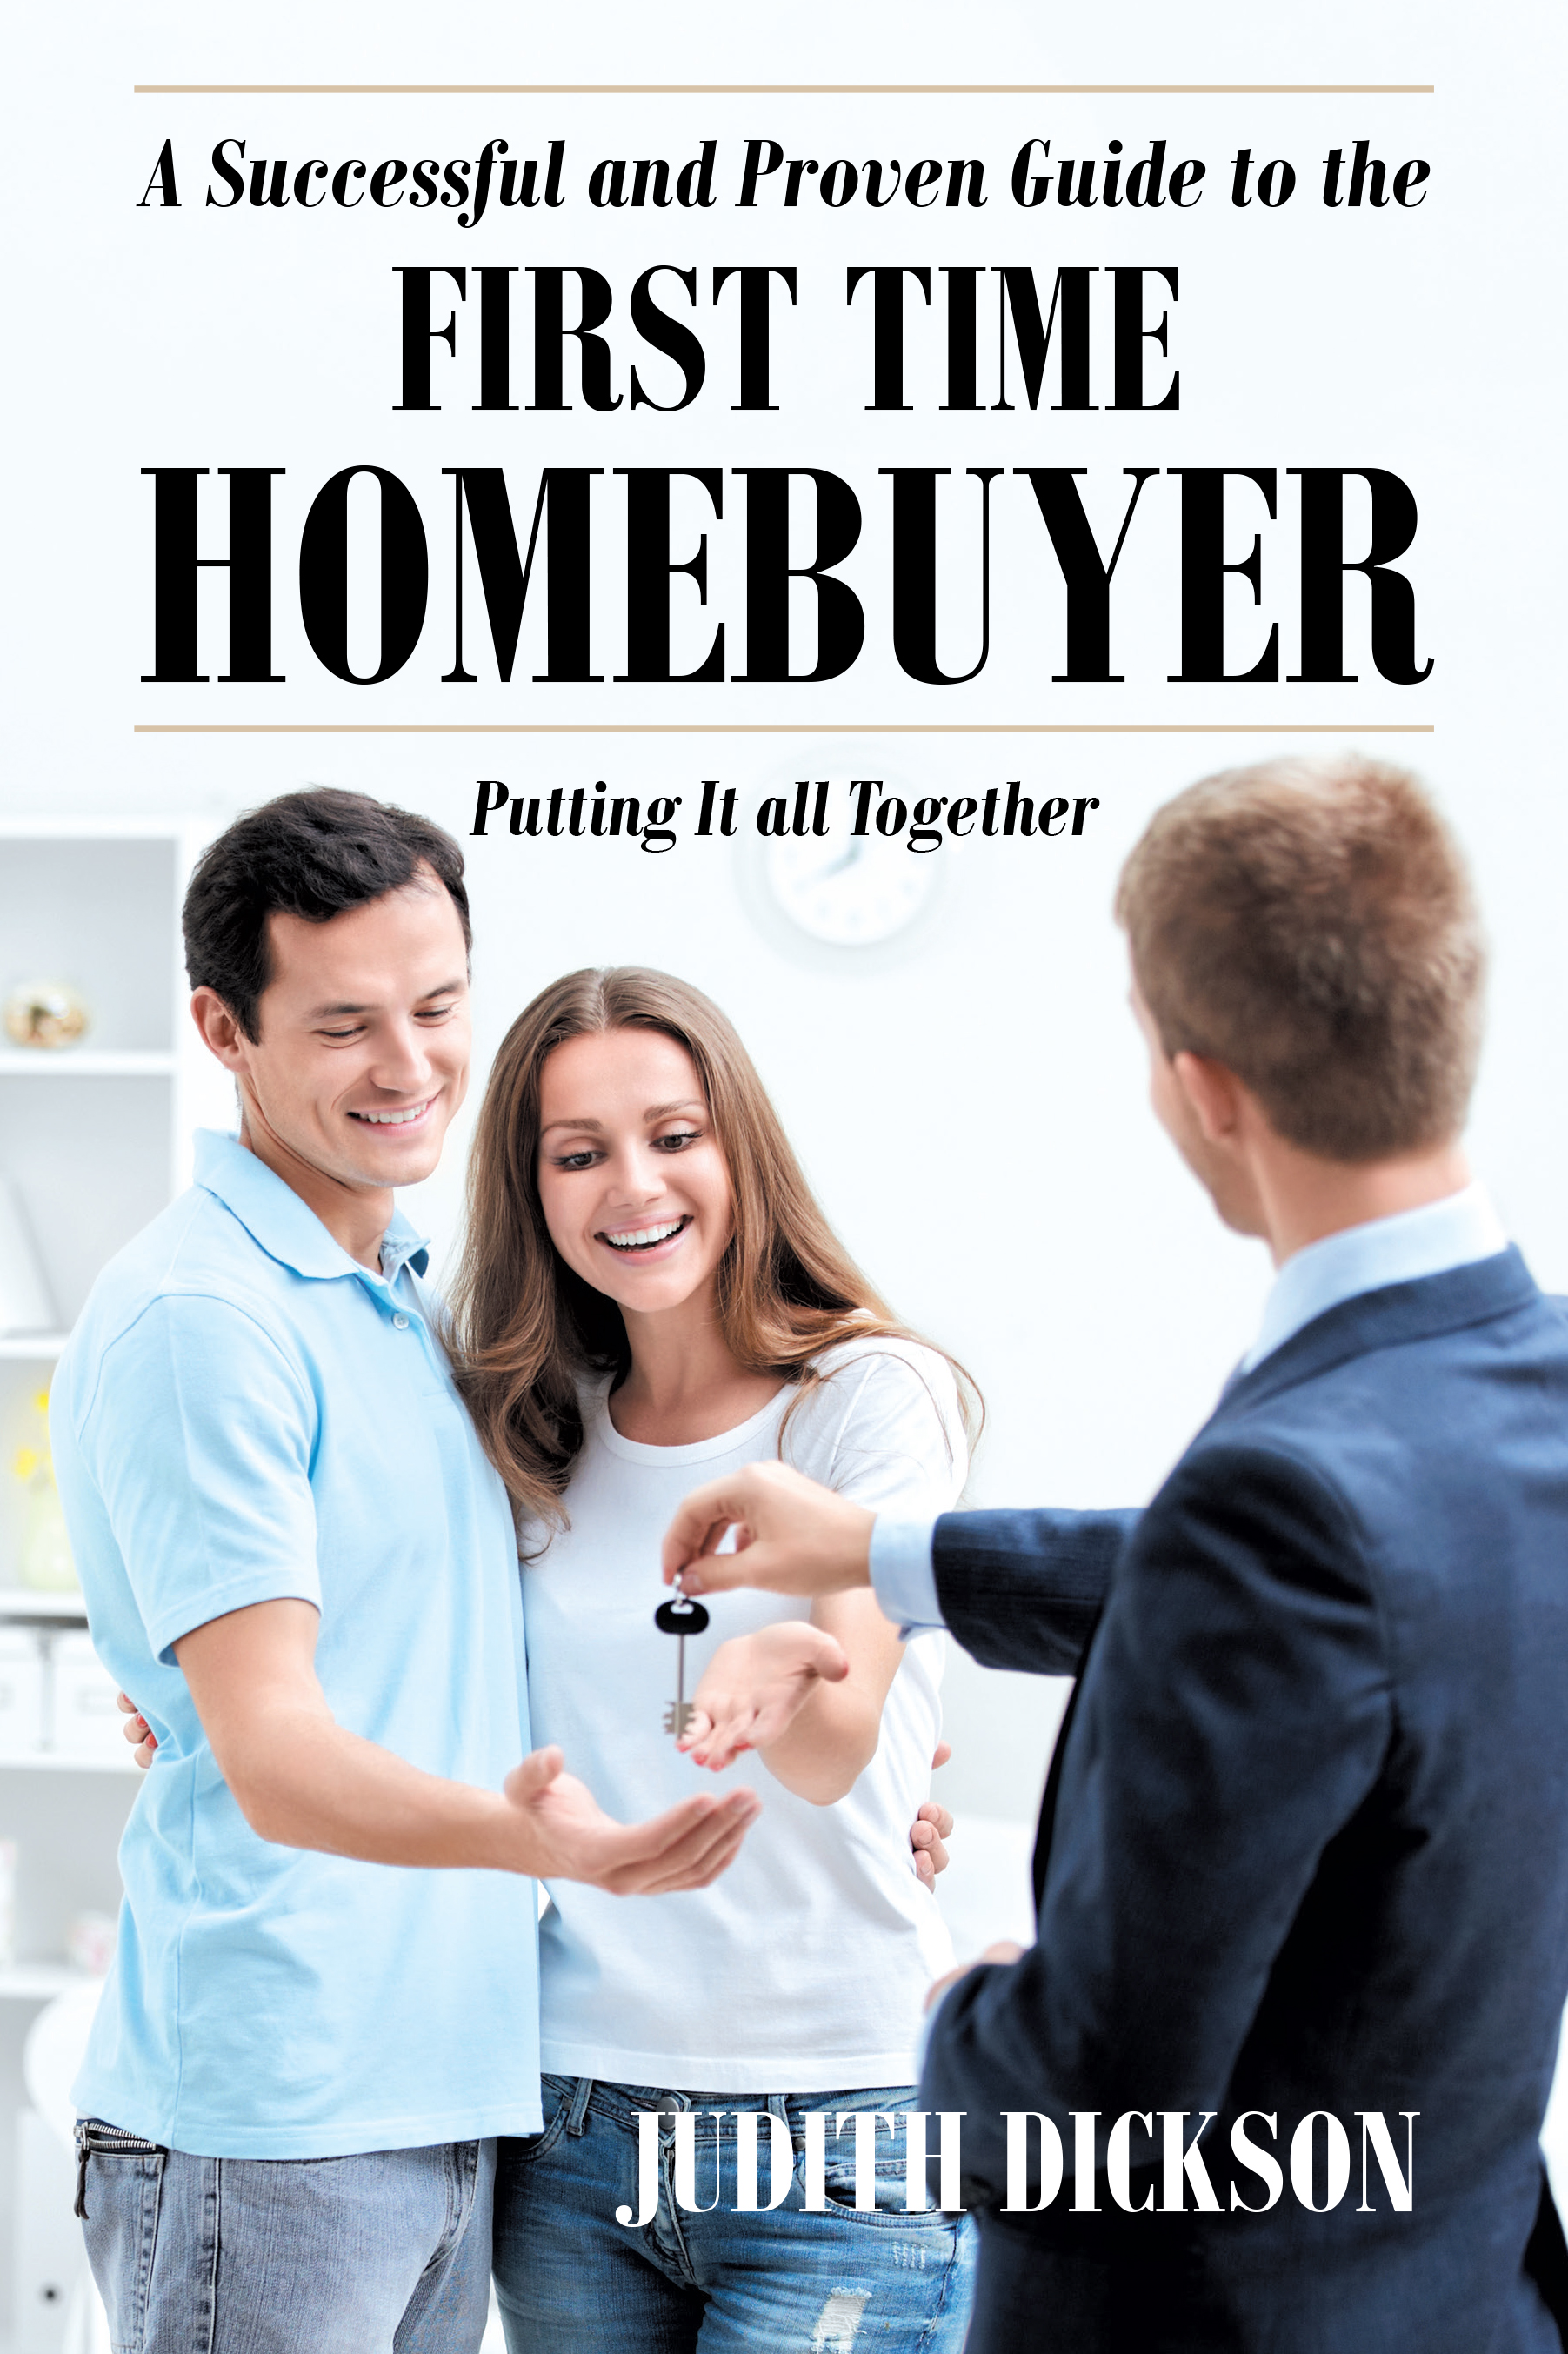  A Successful and Proven Guide to the First Time Home Buyer-Putting It All Together Cover Image